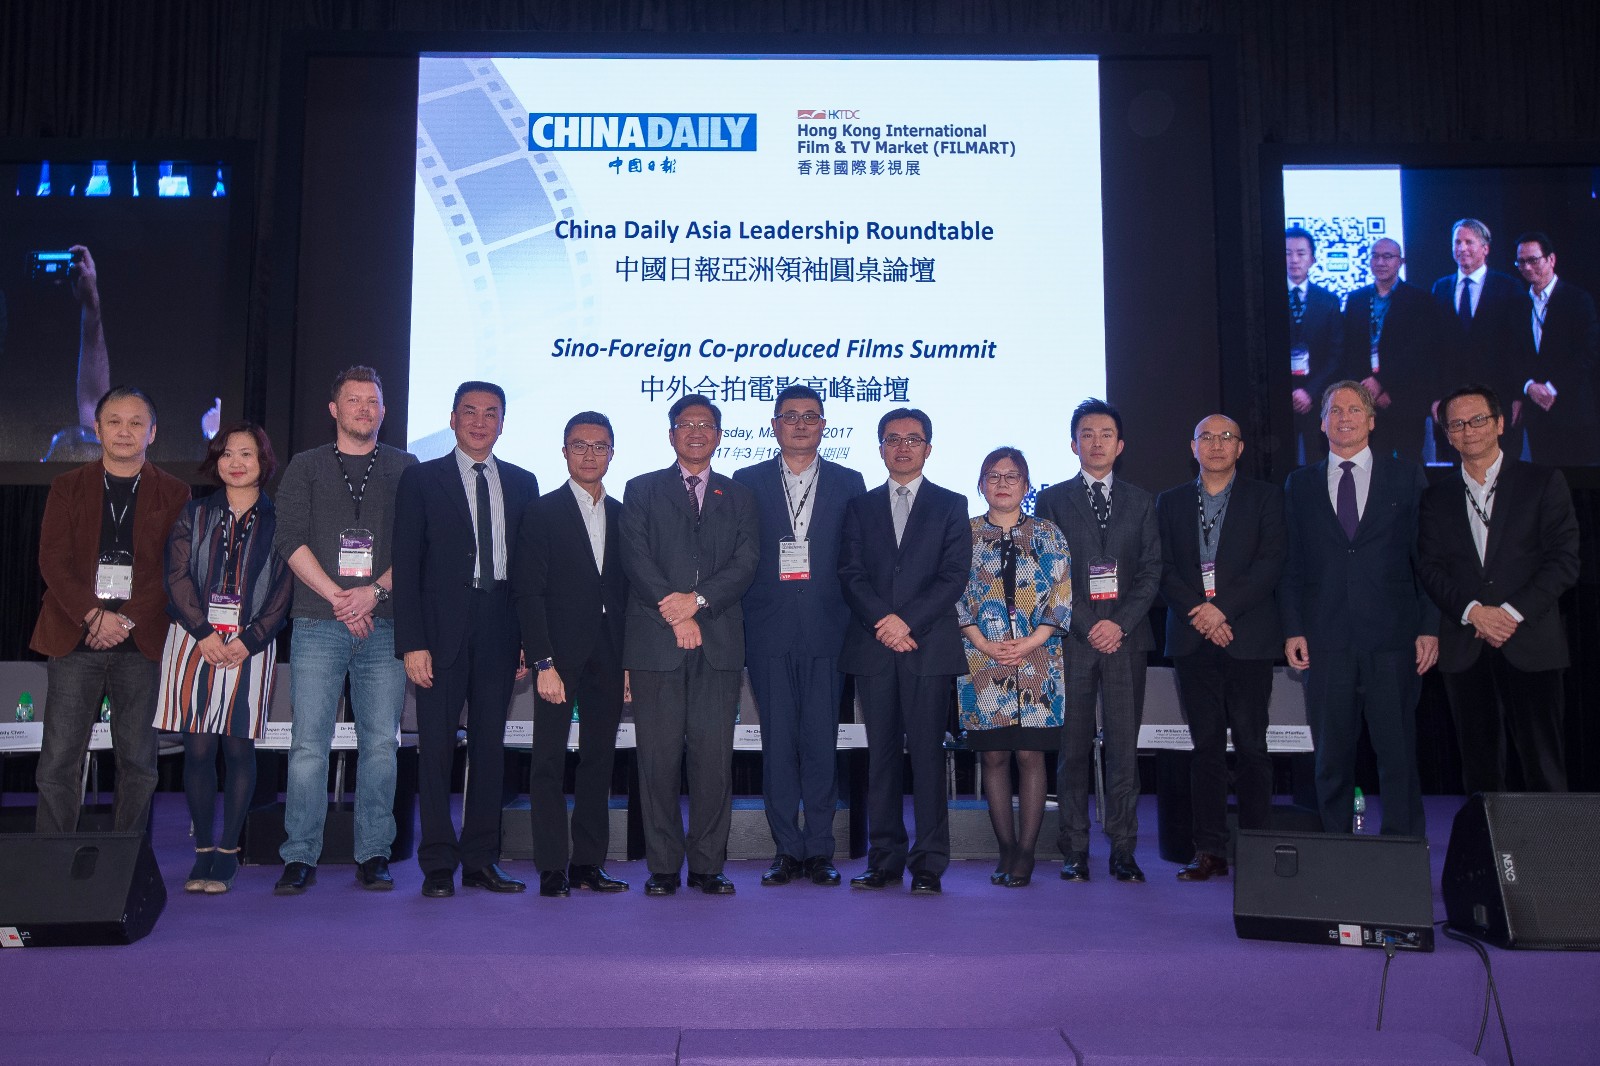 FILMART China Daily Roundtable Summit Coverage!